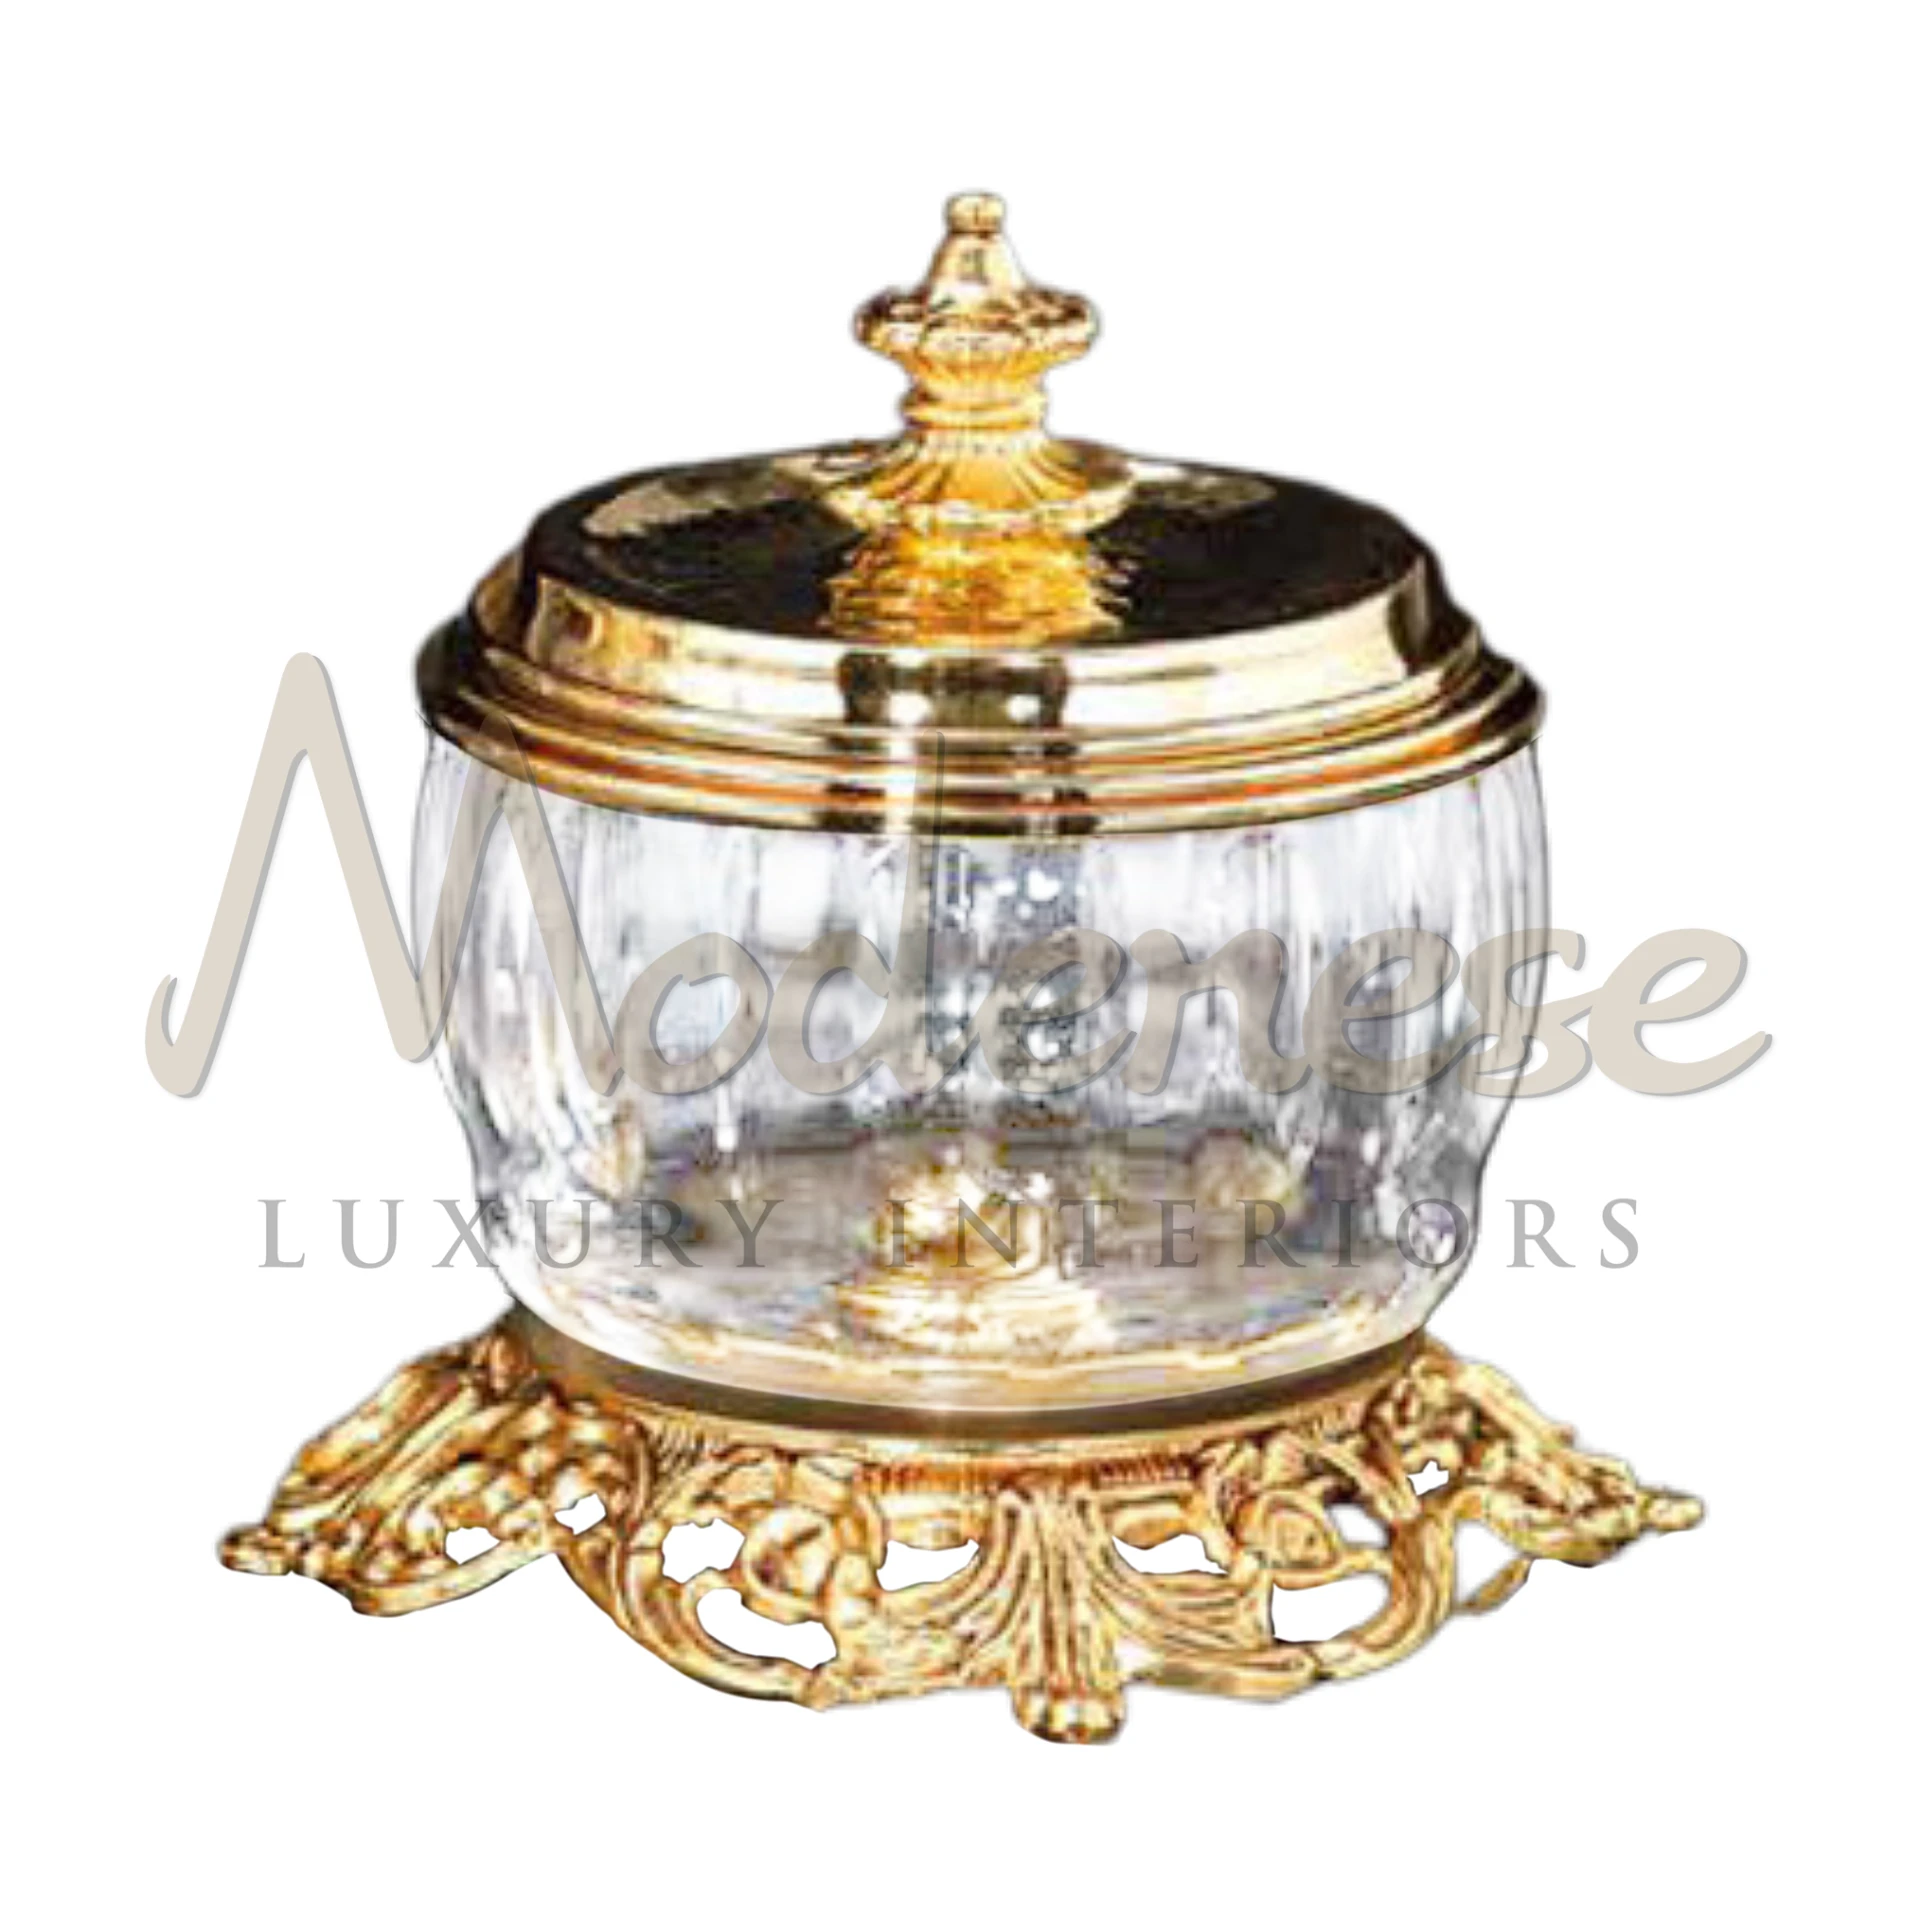 Royal Glass Gold Elements Box, exuding luxury with high-quality glass and intricate gold detailing, perfect for sophisticated home decor.